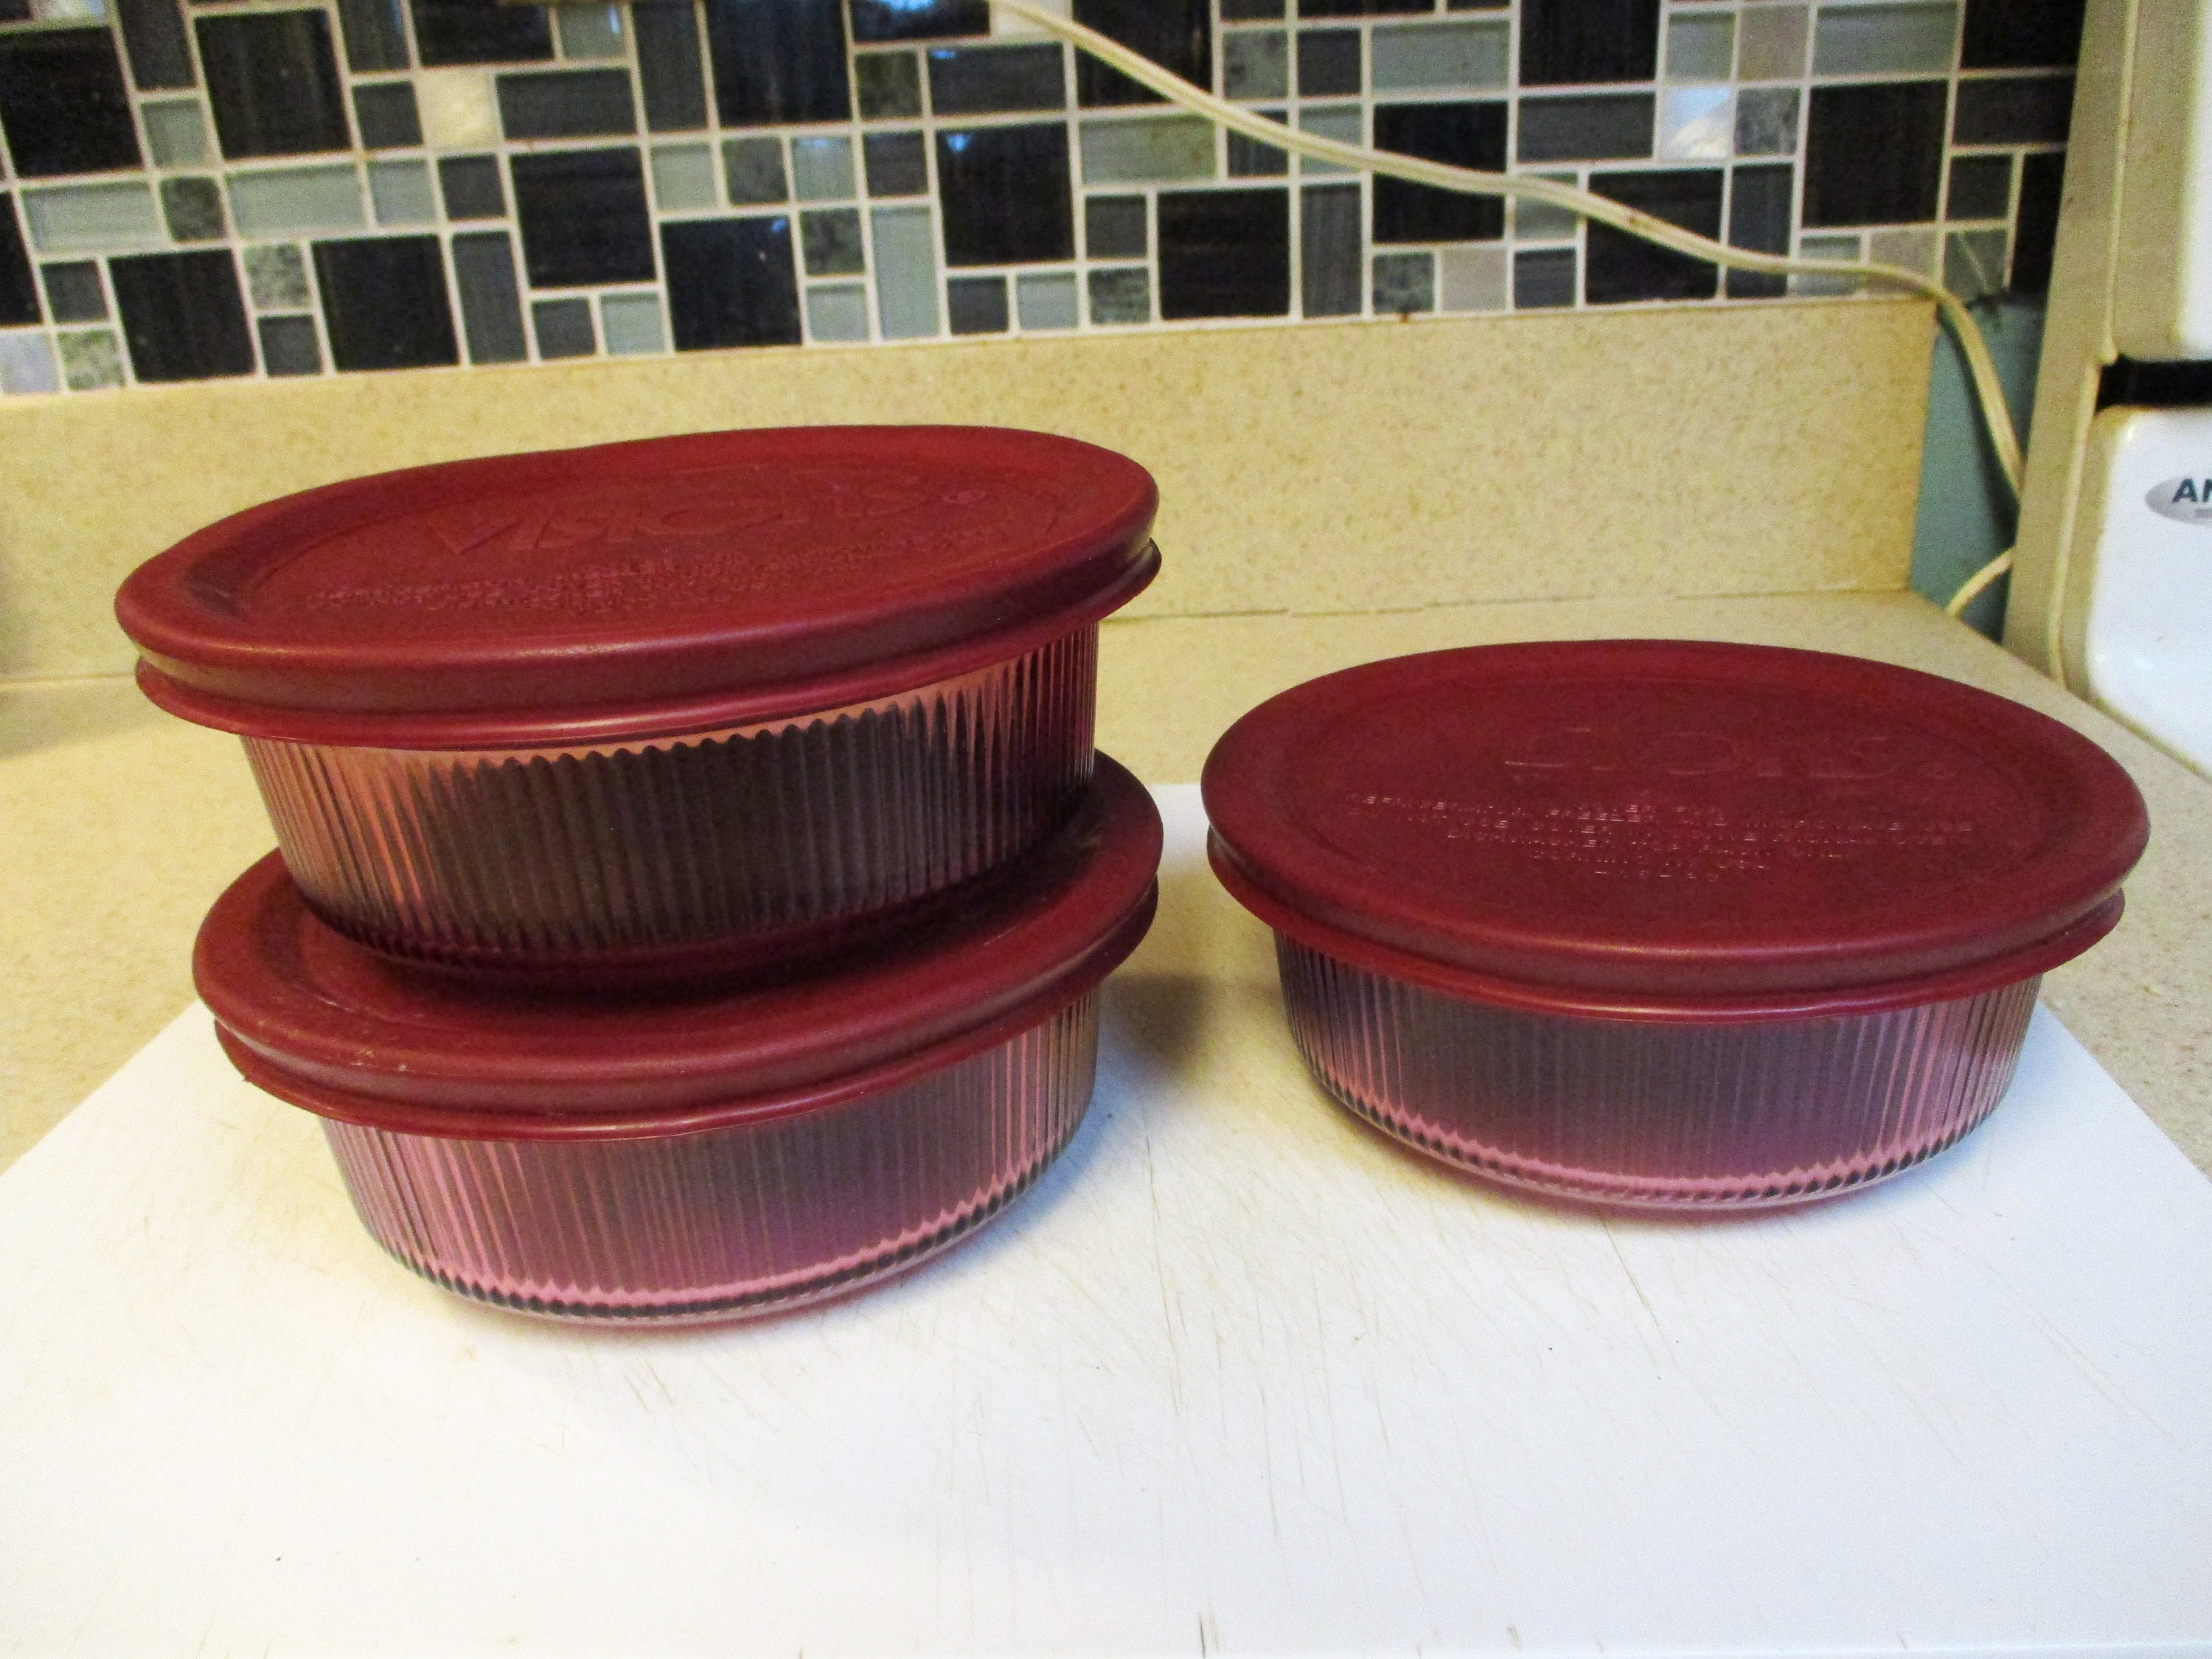 3 Piece Visions Ribbed Cranberry Tint Cookware by Corning No Lids 1 Pint  450 Ml Made in USA 